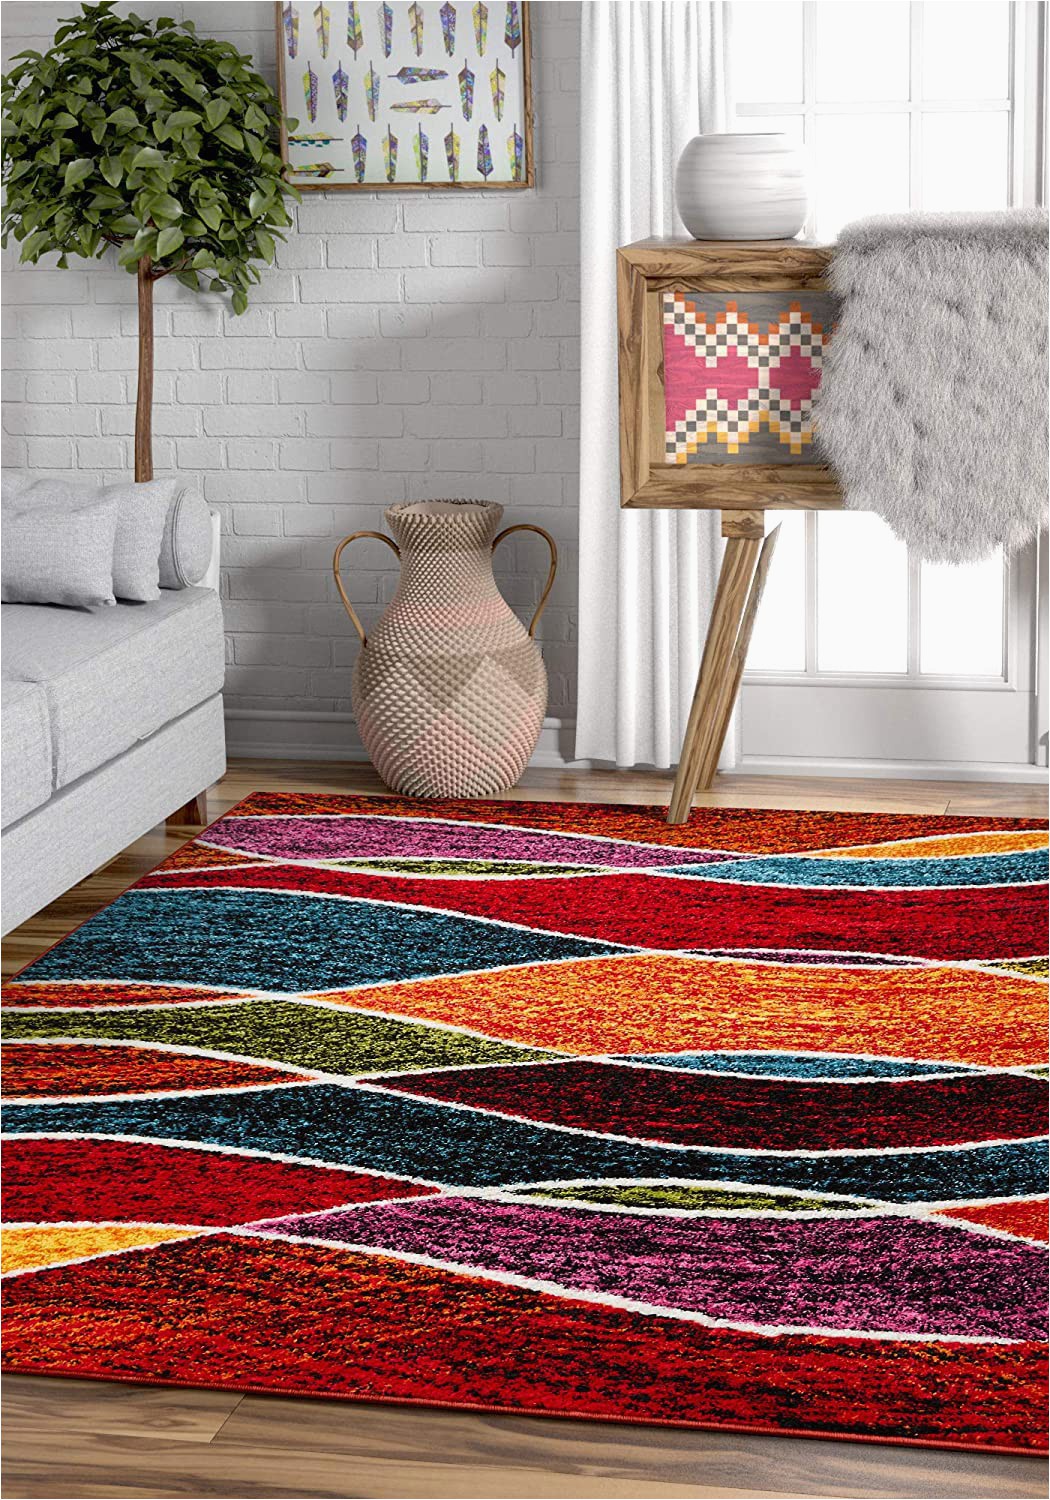 Area Rugs that Don T Shed Well Woven Sephra Modern Geometric Stripe Pattern 3×5 3 3 X 5 area Rug soft Shed Free Easy to Clean Stain Resistant